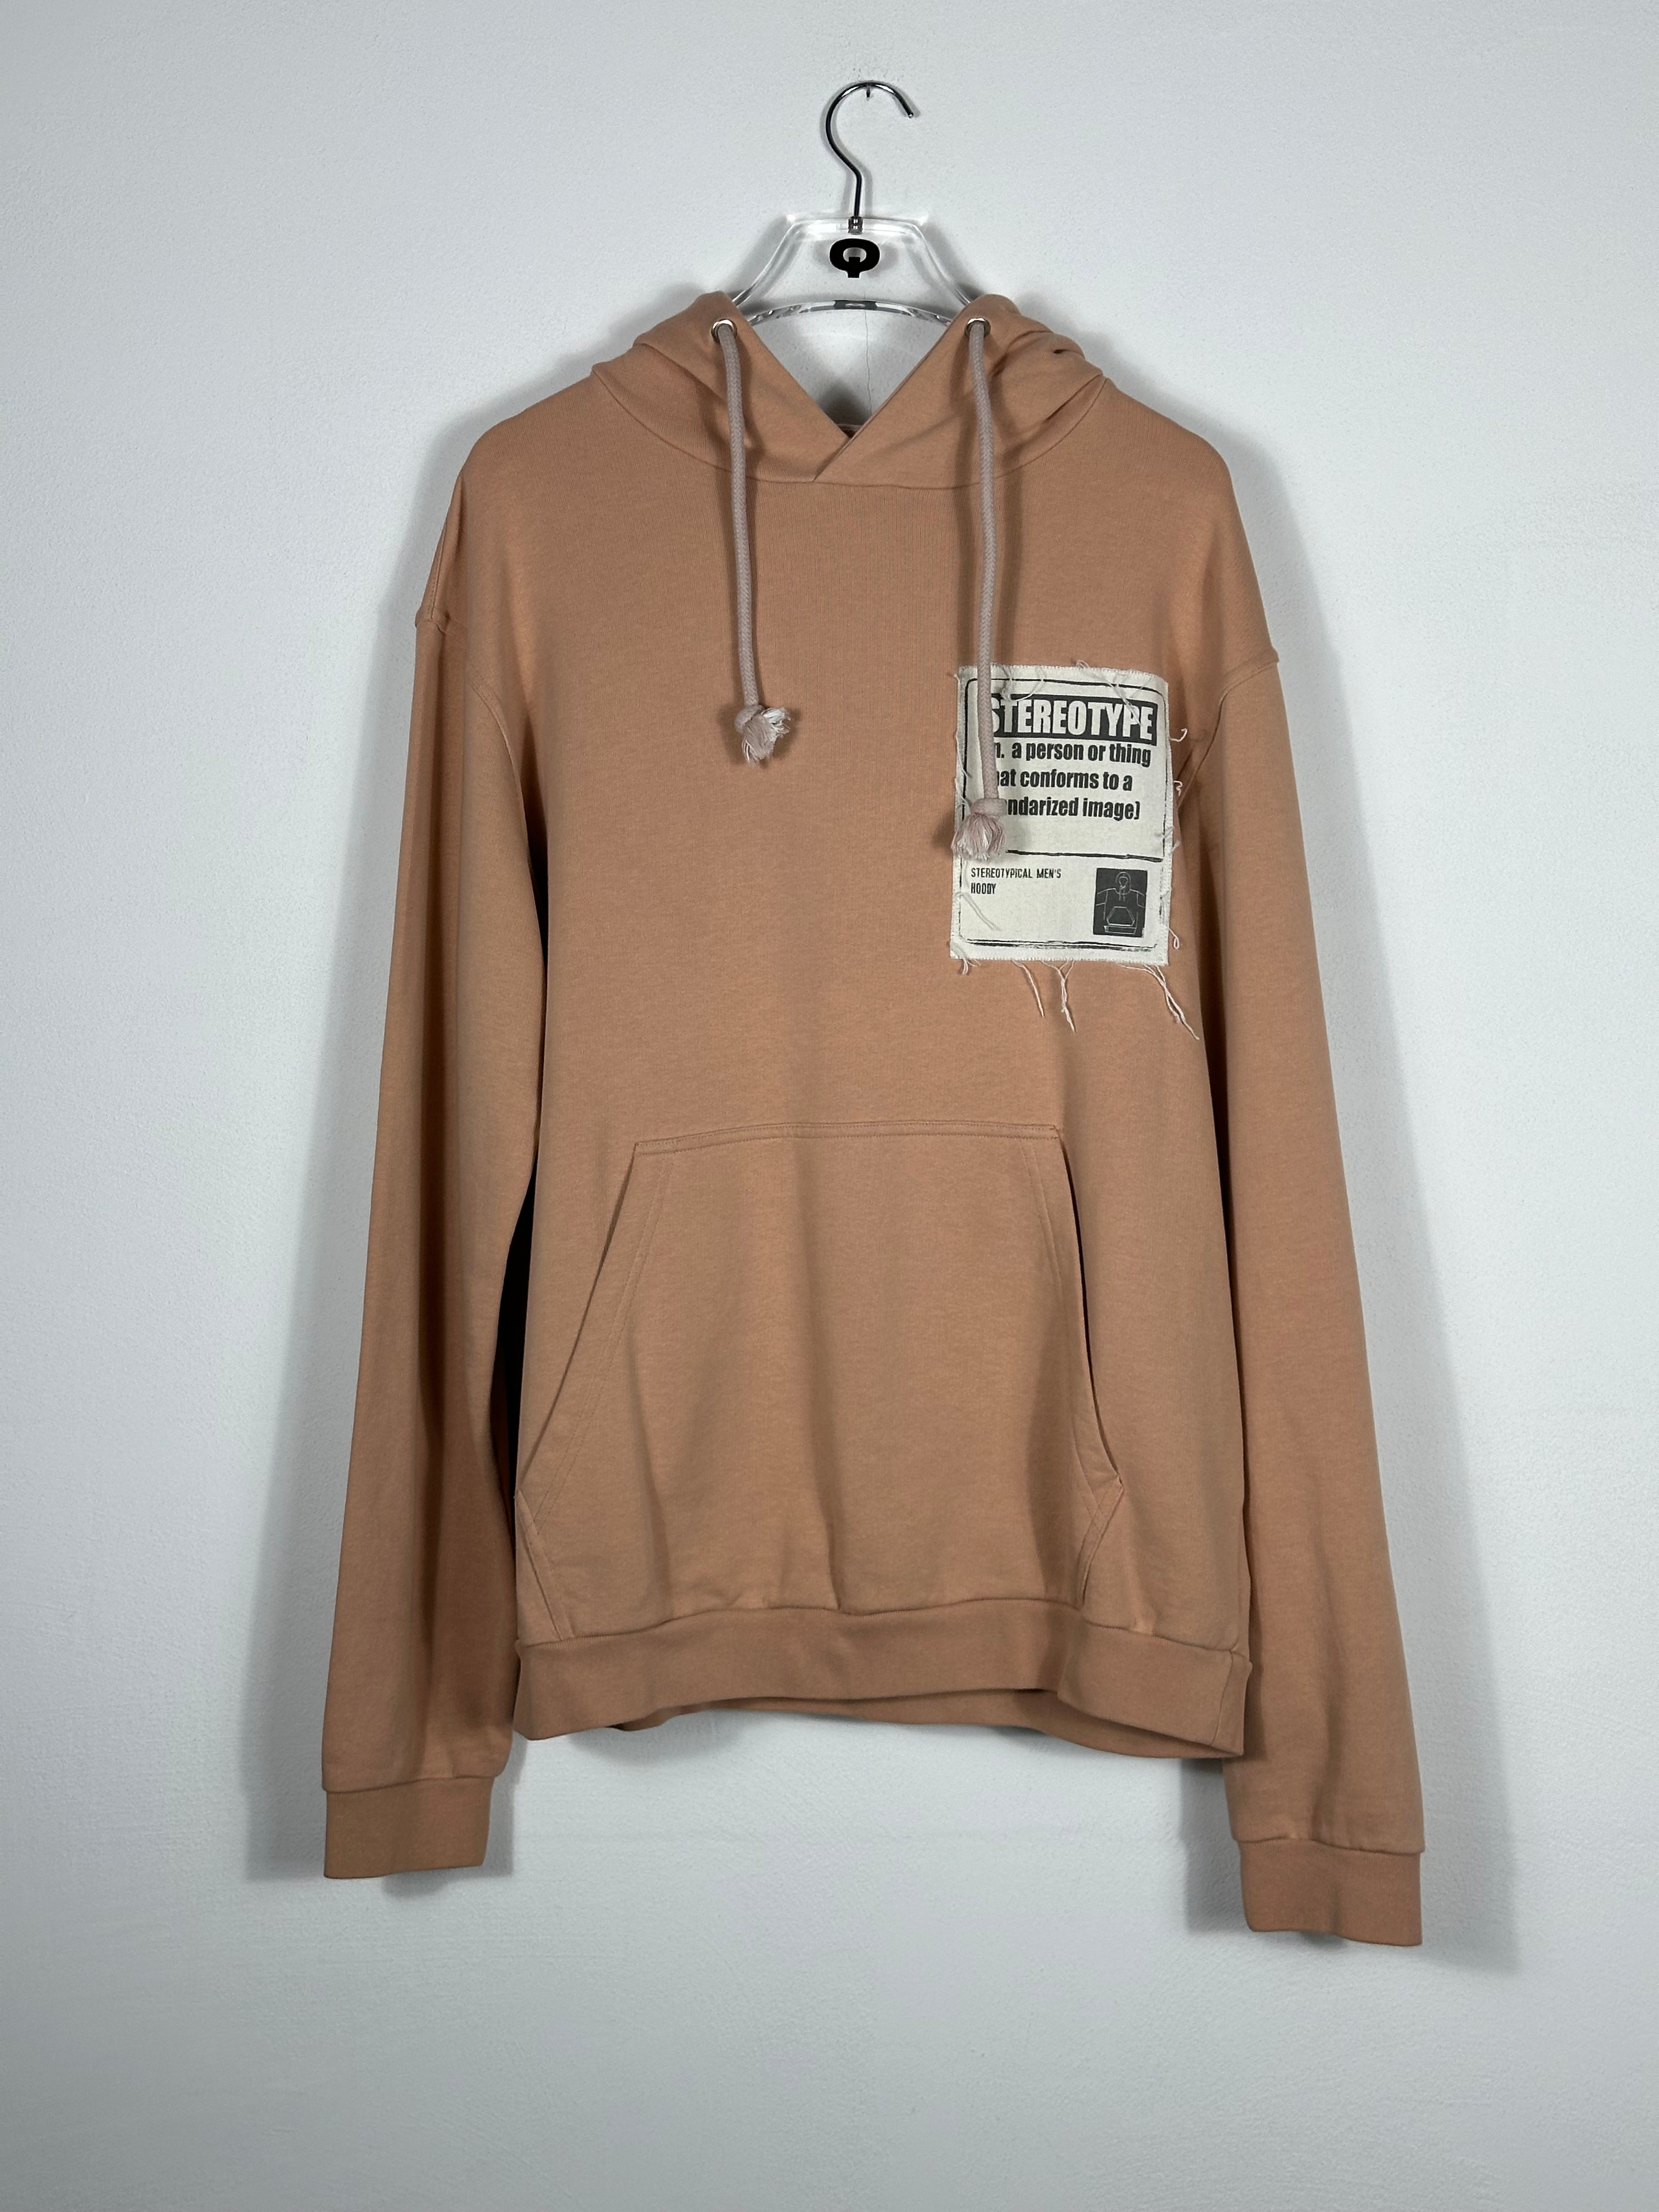 Patched Hoodie by Sfera Ebbasta